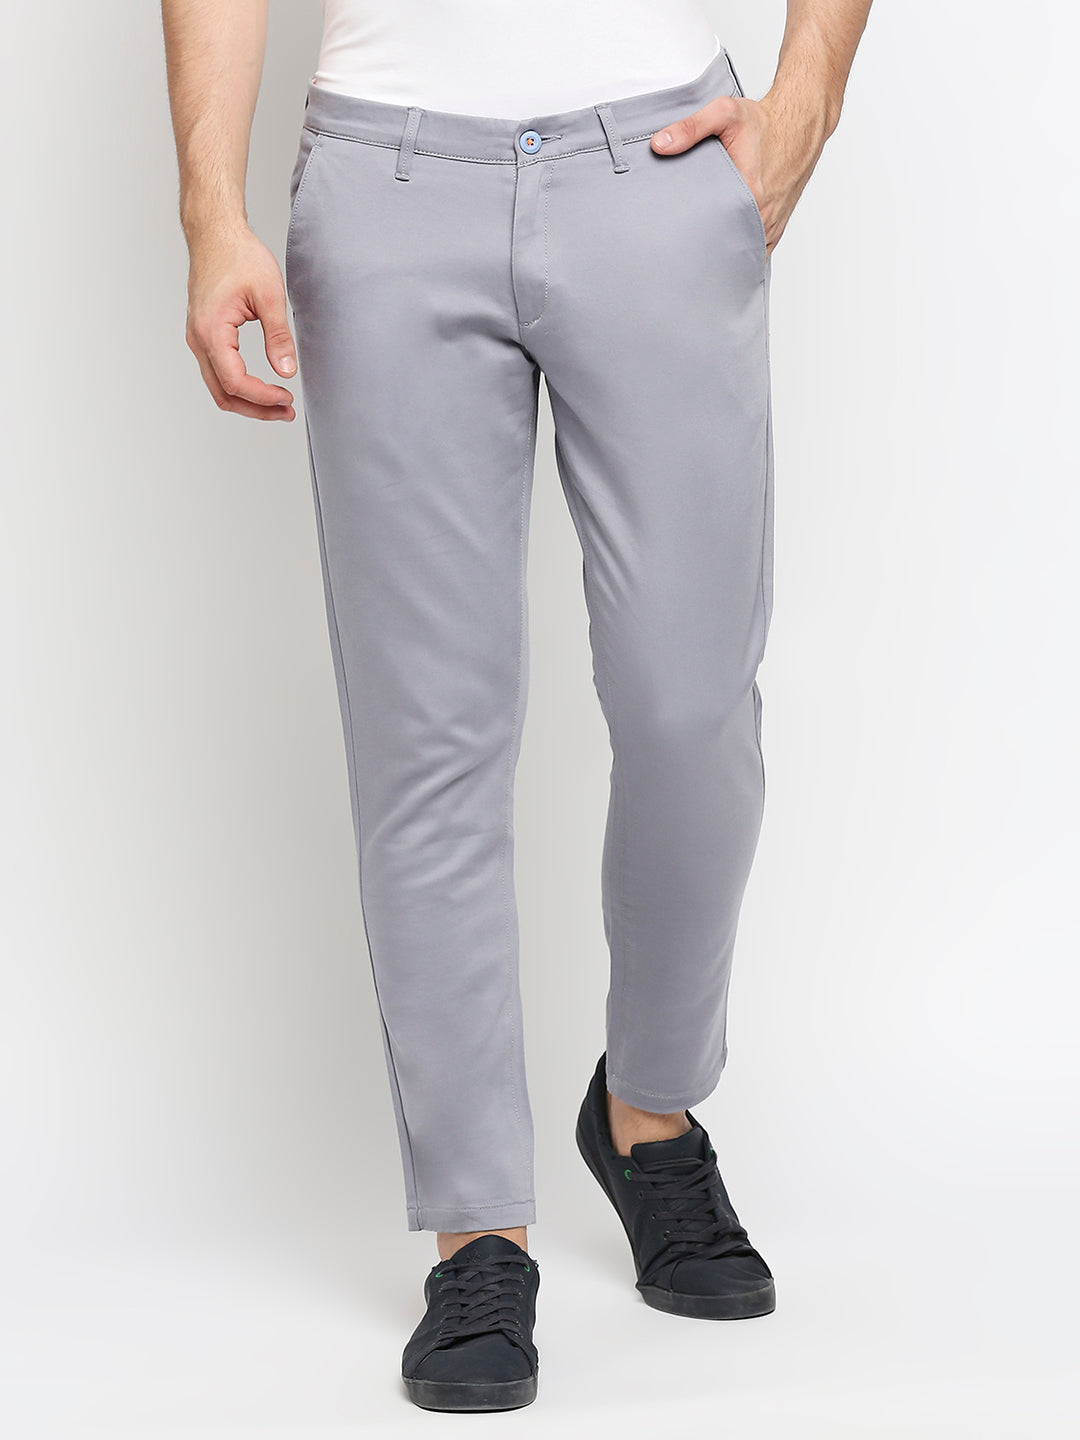 Grey English Flannel Side Adjuster Trousers | Men's Country Clothing |  Cordings US